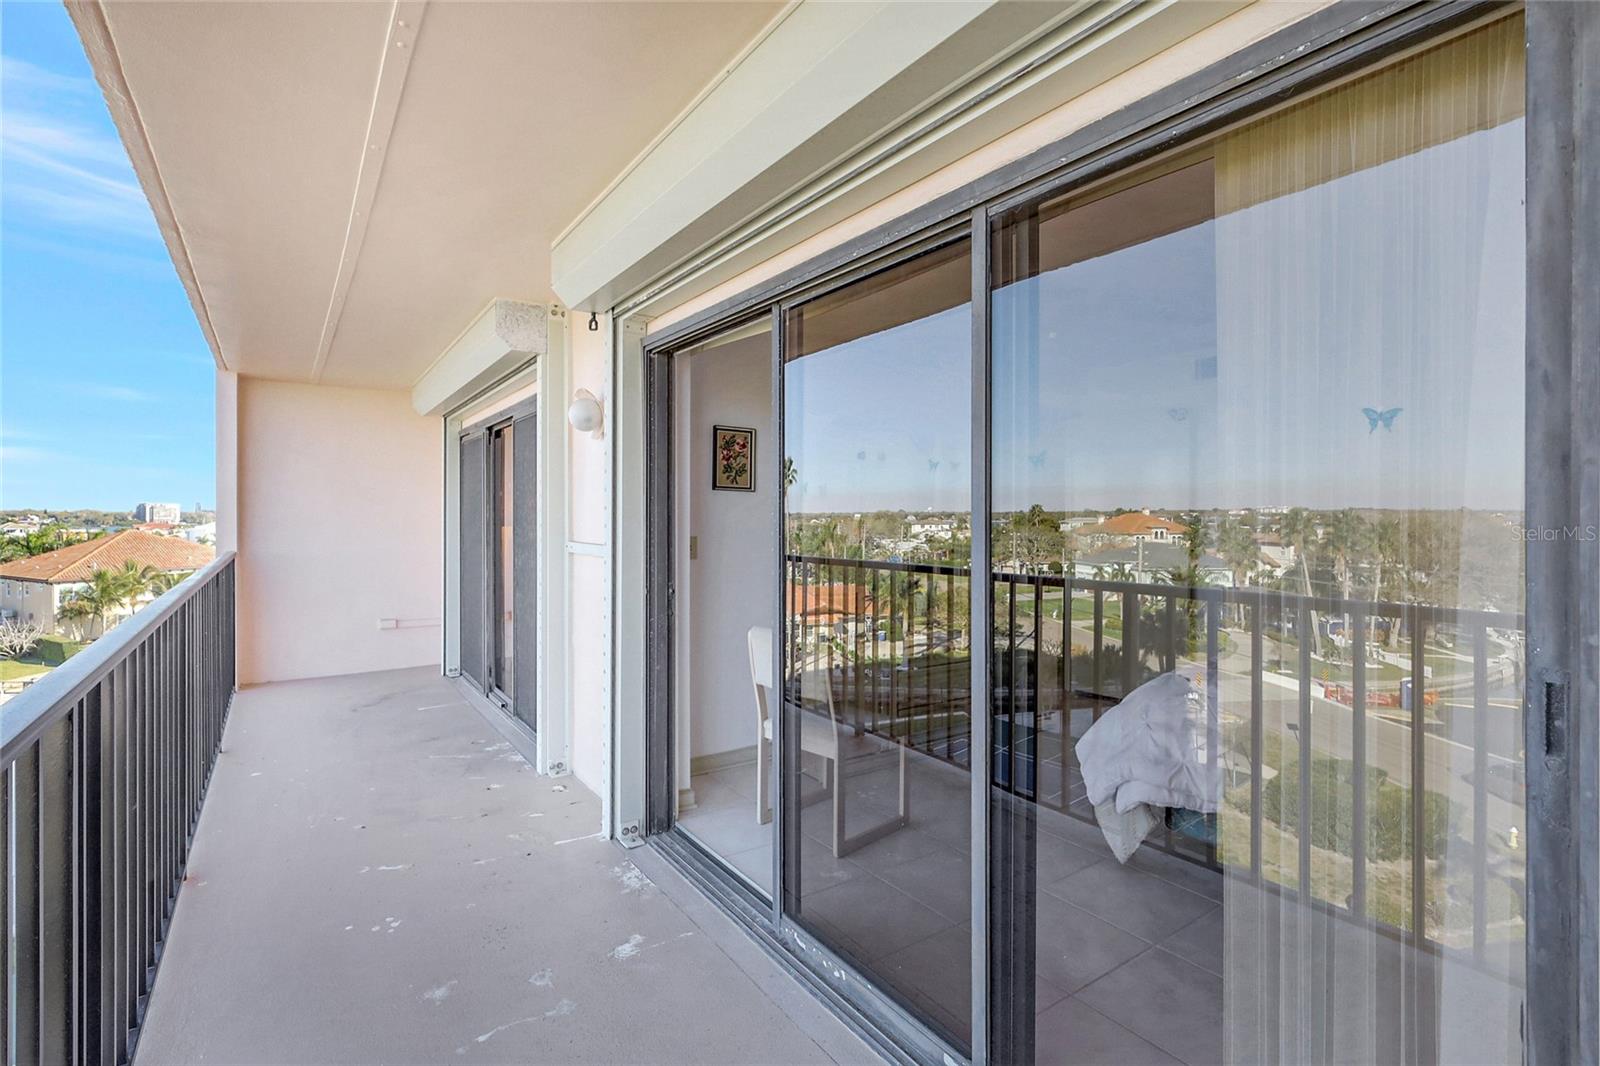 Balcony outside your Primary bedroom